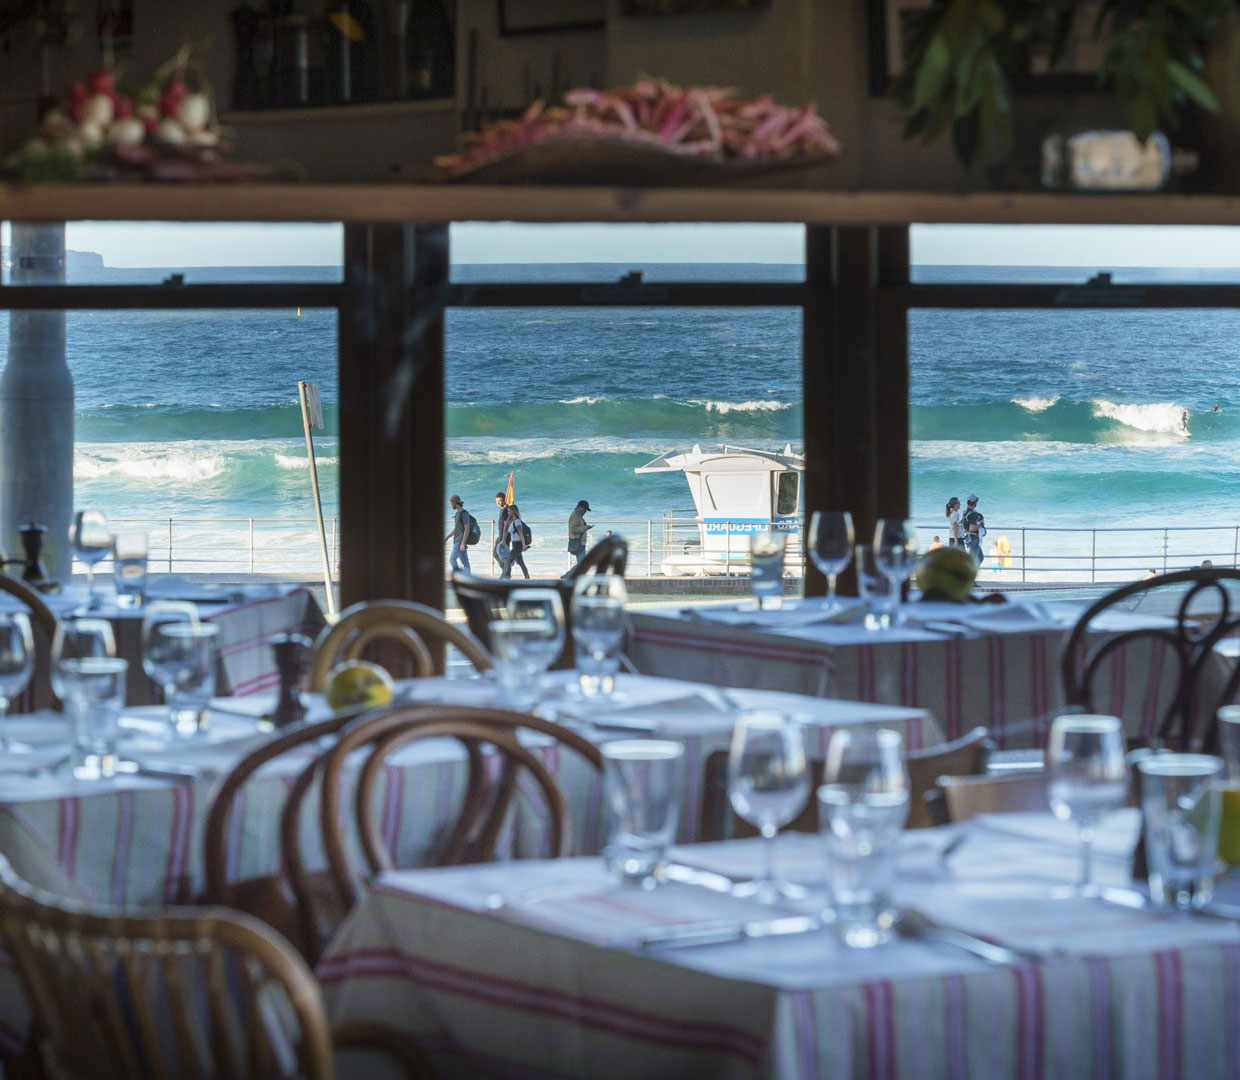 A view of Bondi Beach from Sean's Panorama, one of the best restaurants in Sydney